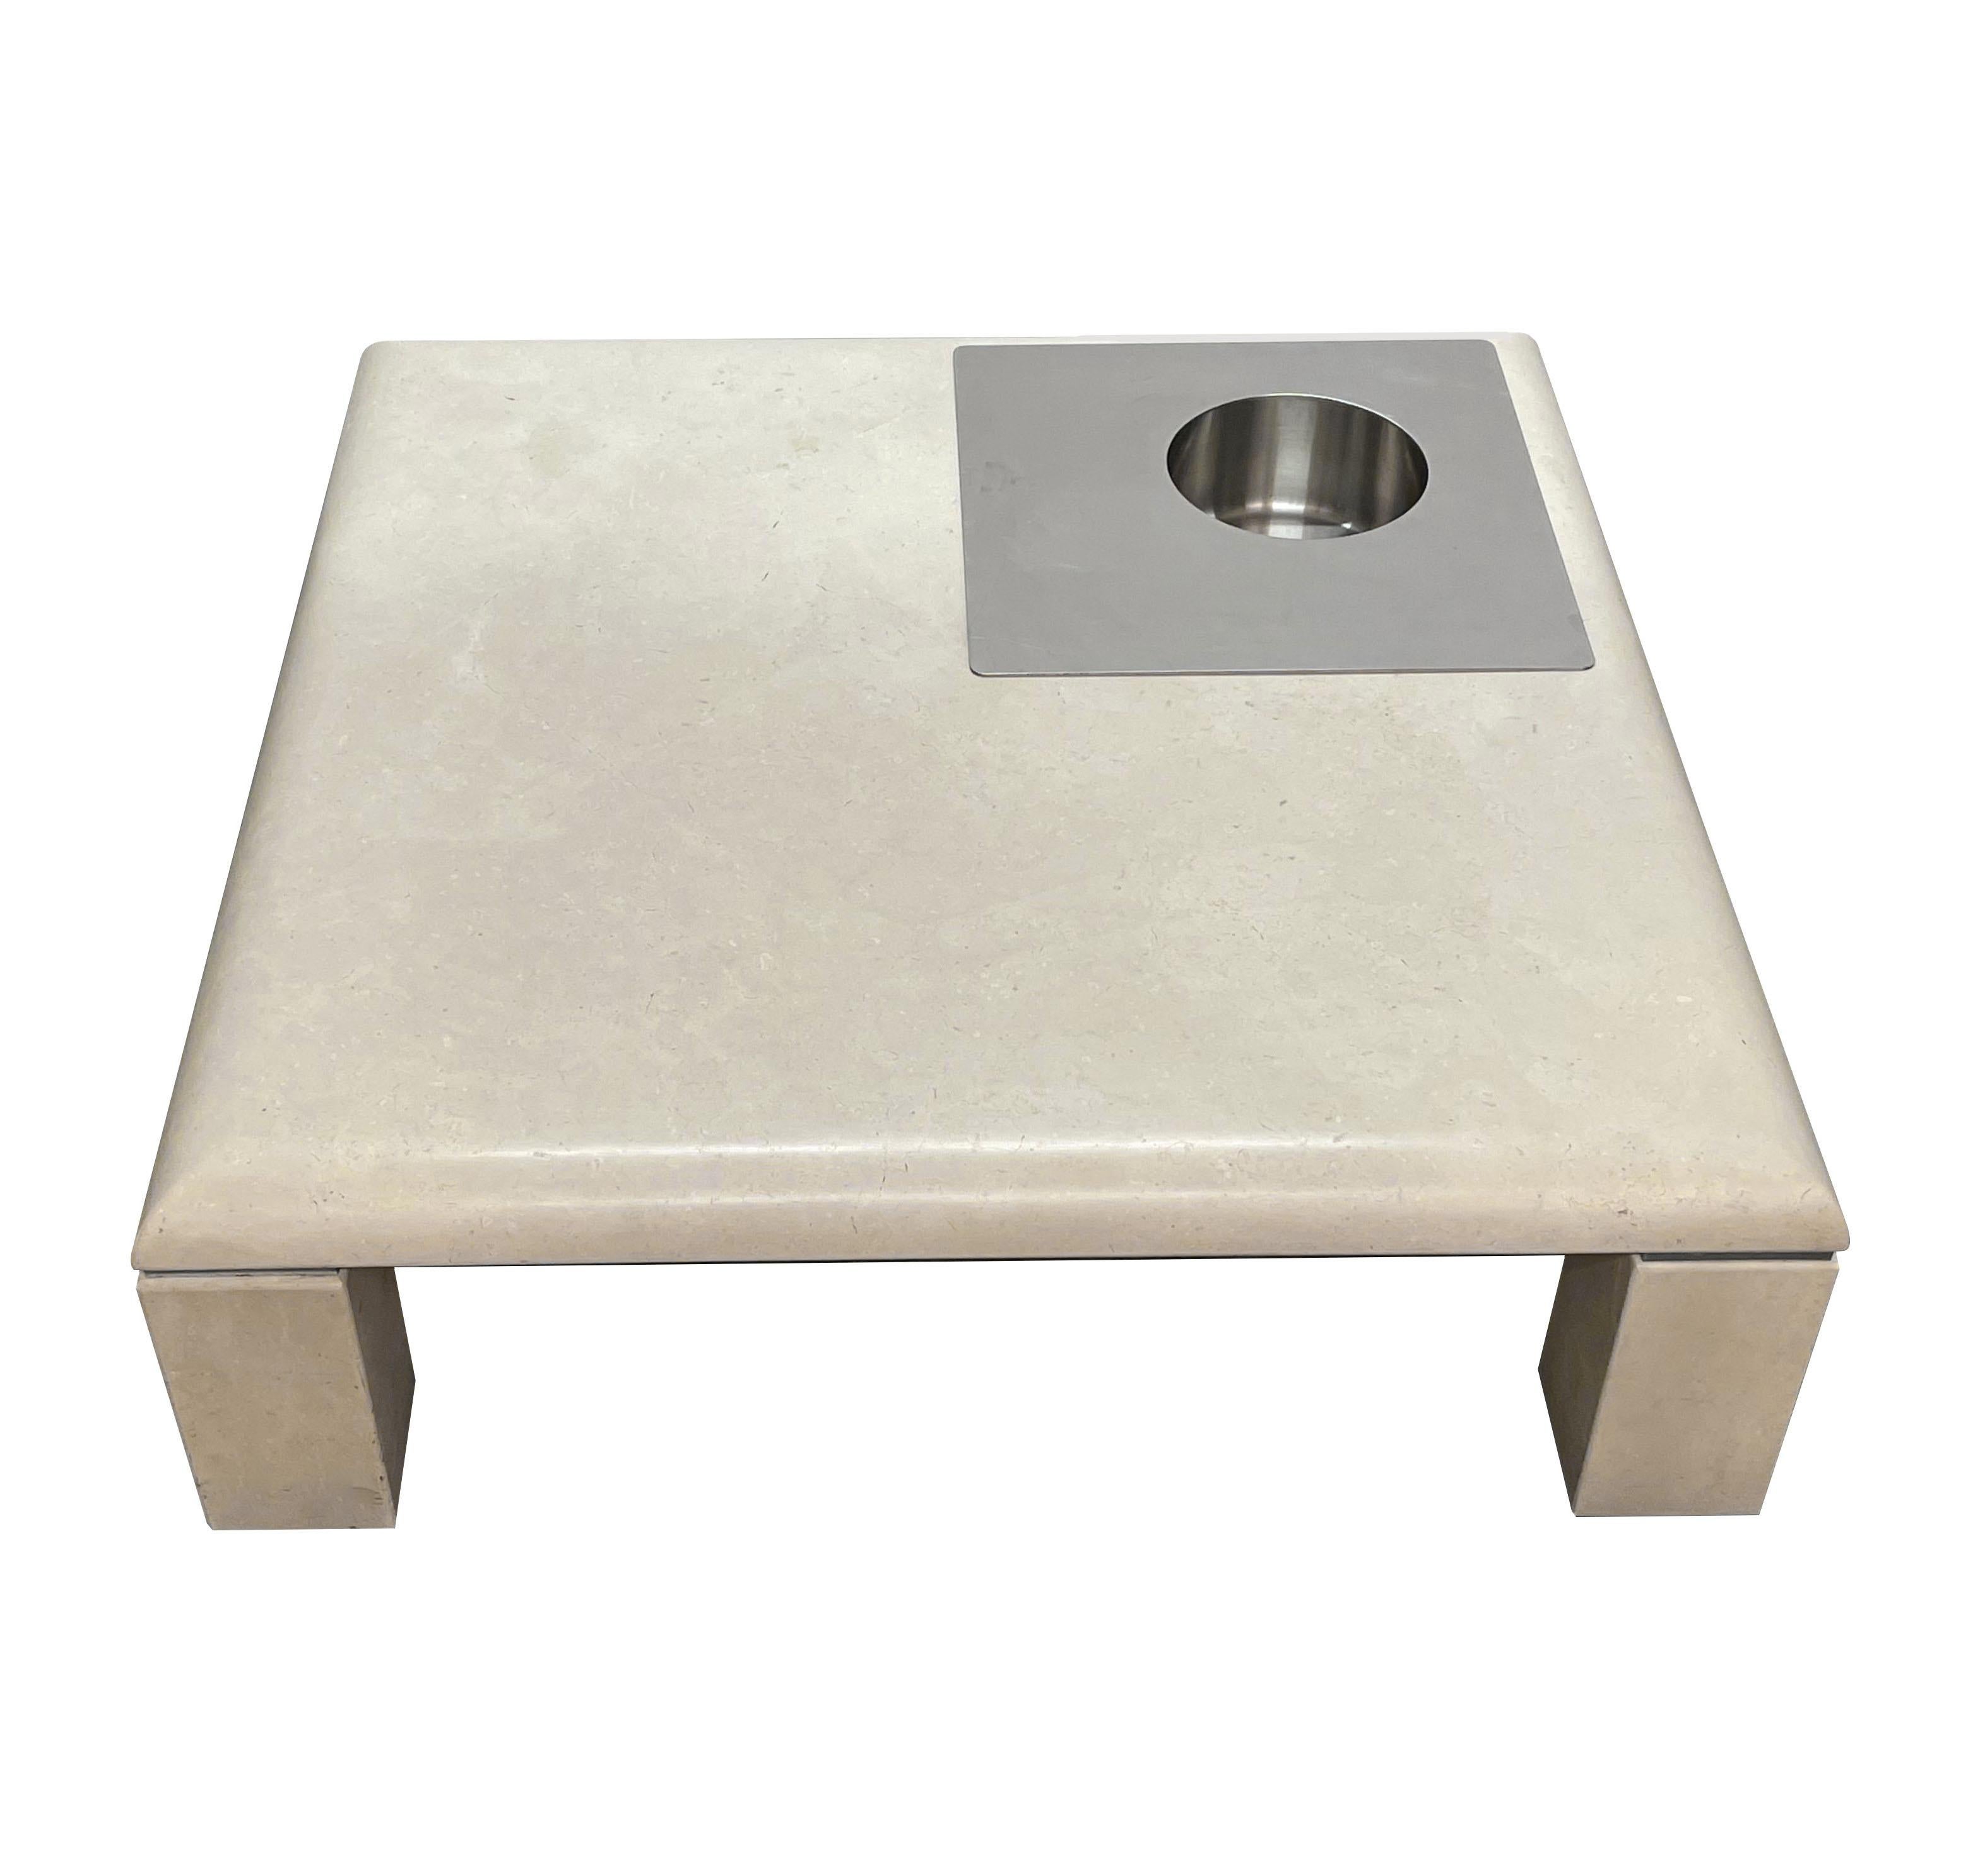 Midcentury squared coffee table in white Botticino marble and steel bottles or objects holder. This outstanding item was designed in Italy during the 1970s in the style of Willy Rizzo.

This coffee table is unique as it is made of white Botticino